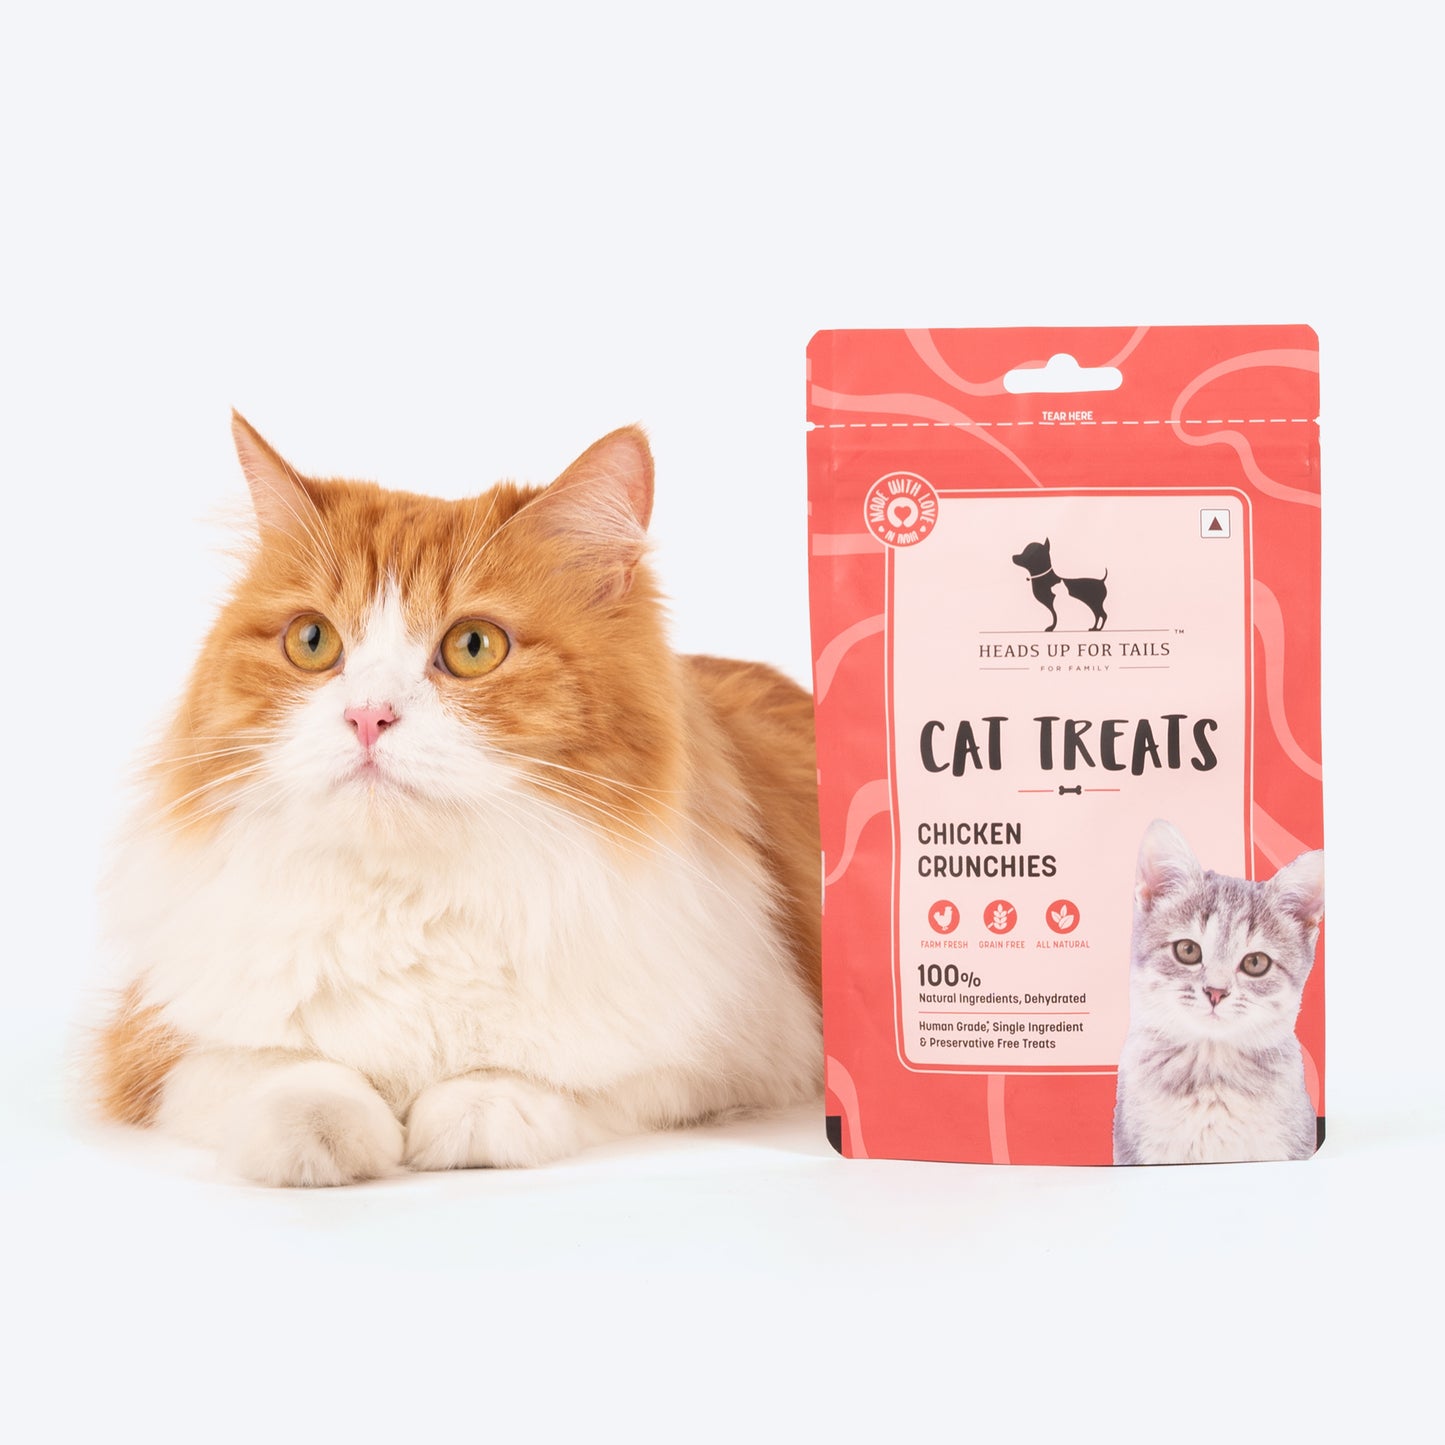 HUFT Cat Treats - Chicken Crunchies - 35 g - Heads Up For Tails